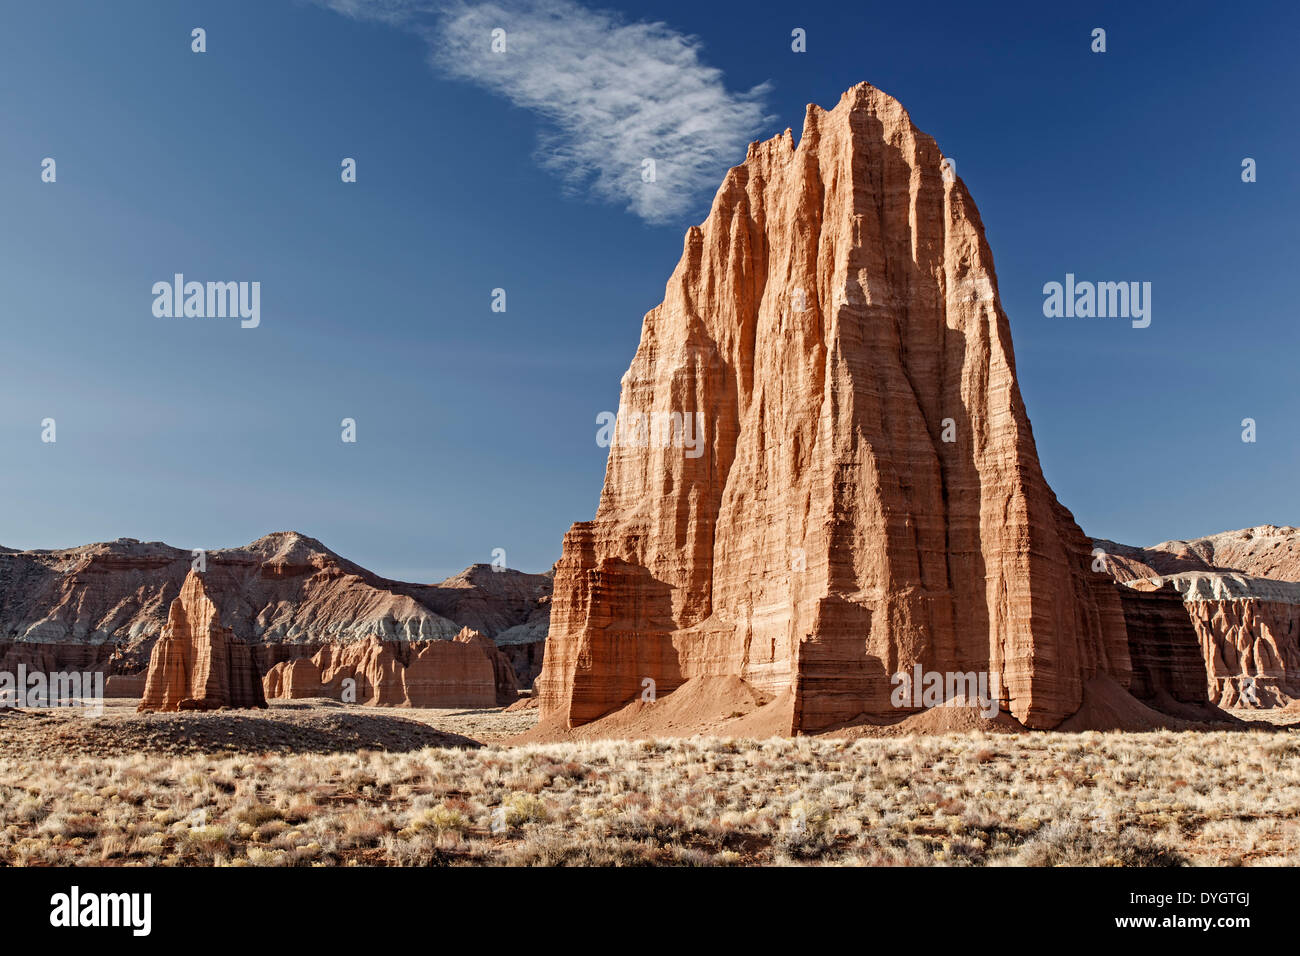 Temple of the Sun (R), Temple of the Moon (L) and sandstone bluffs ...